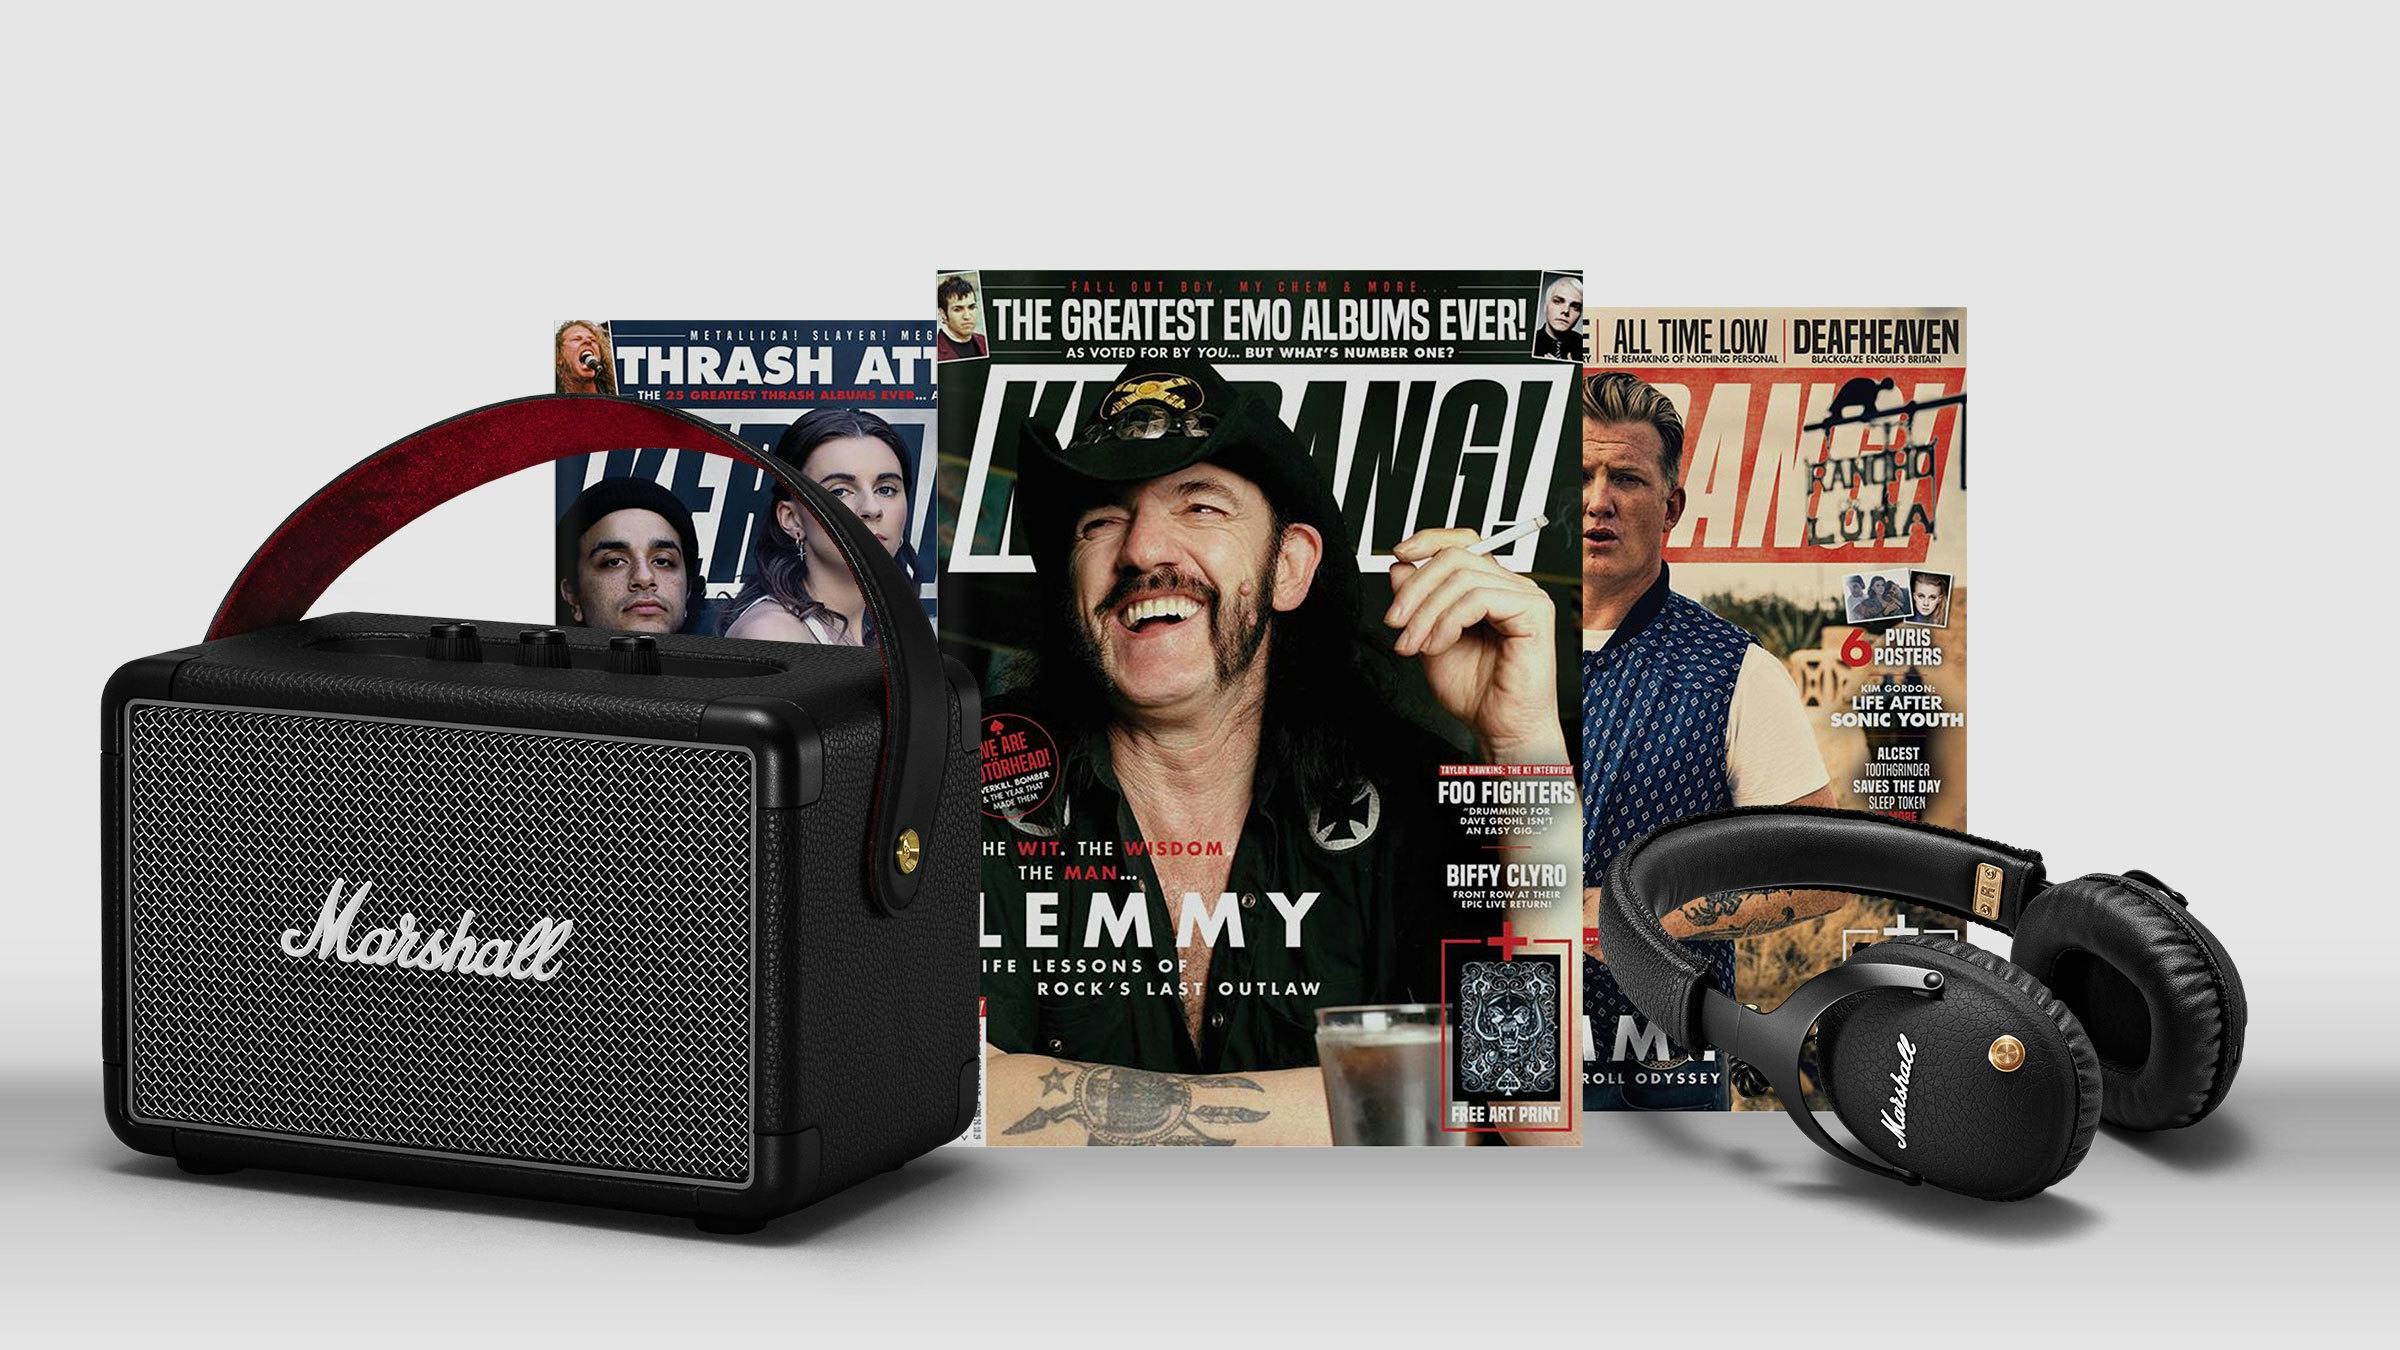 Win Prizes From Marshall And Kerrang! By Taking Our Audience Survey